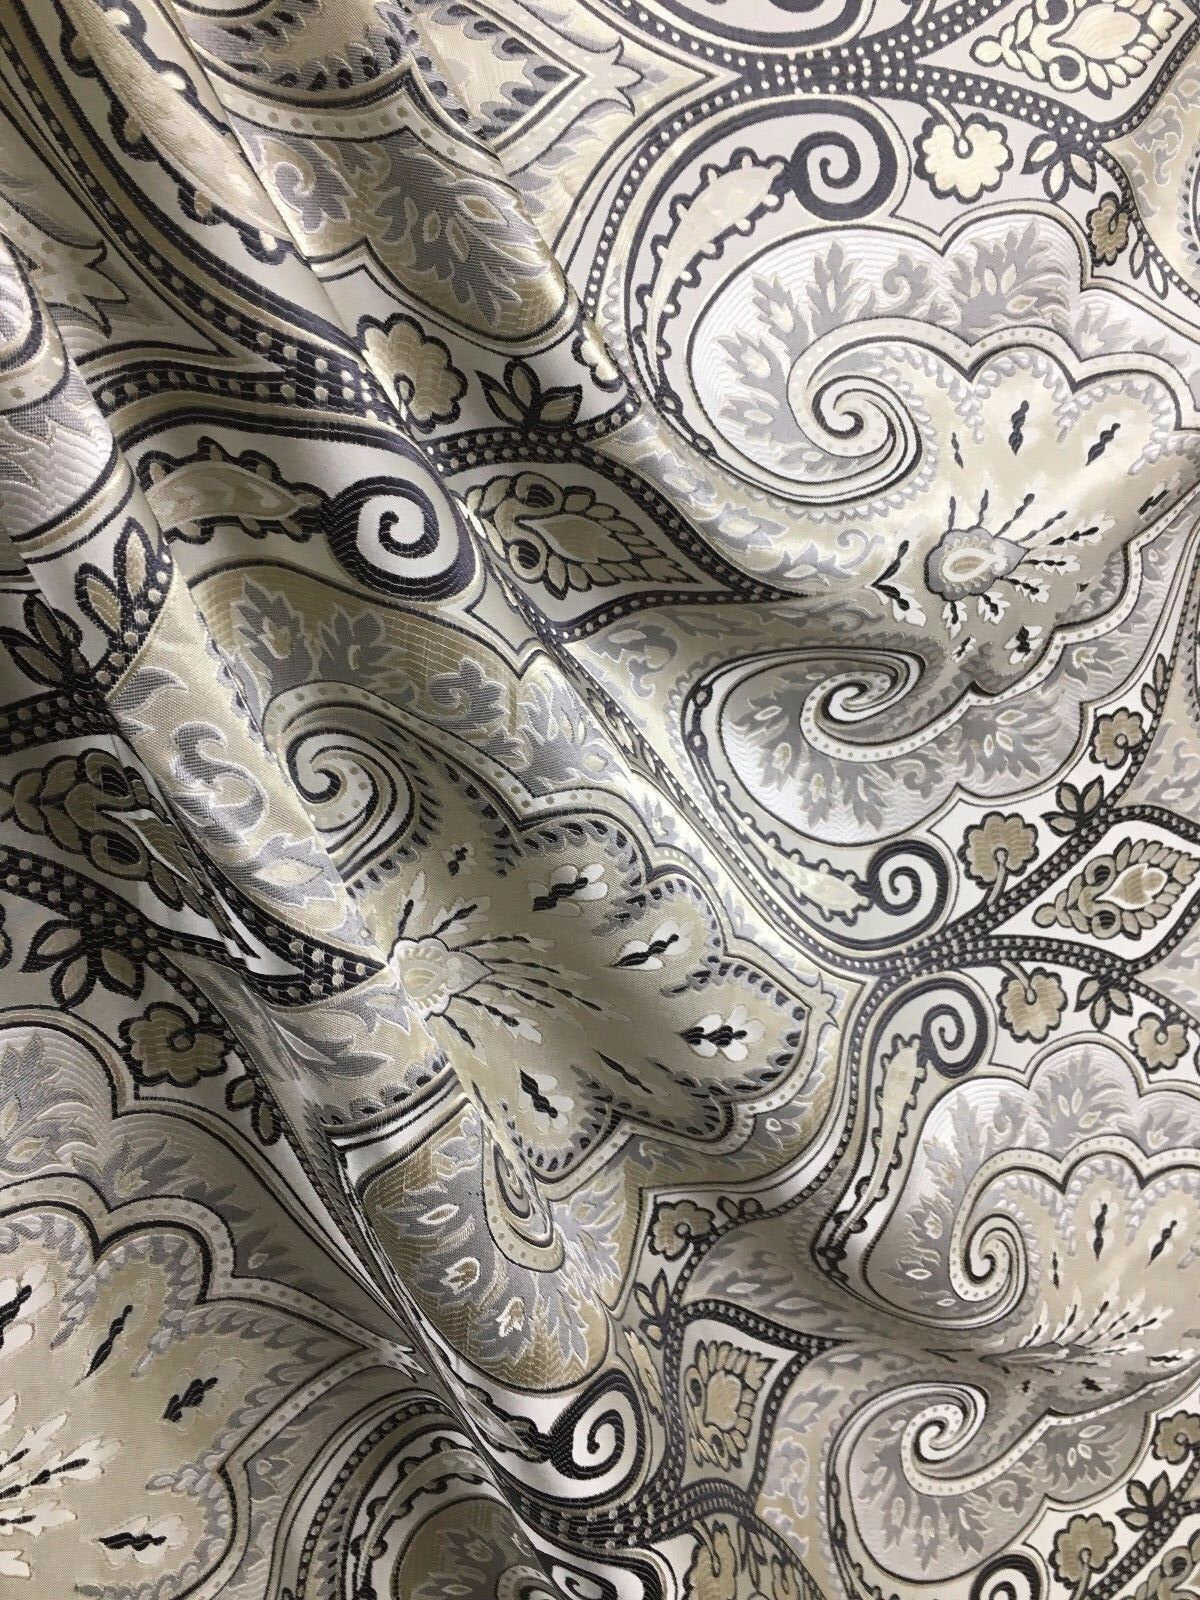 IVORY GREY Damask Brocade Upholstery Drapery Fabric (58 in.) Sold By The Yard